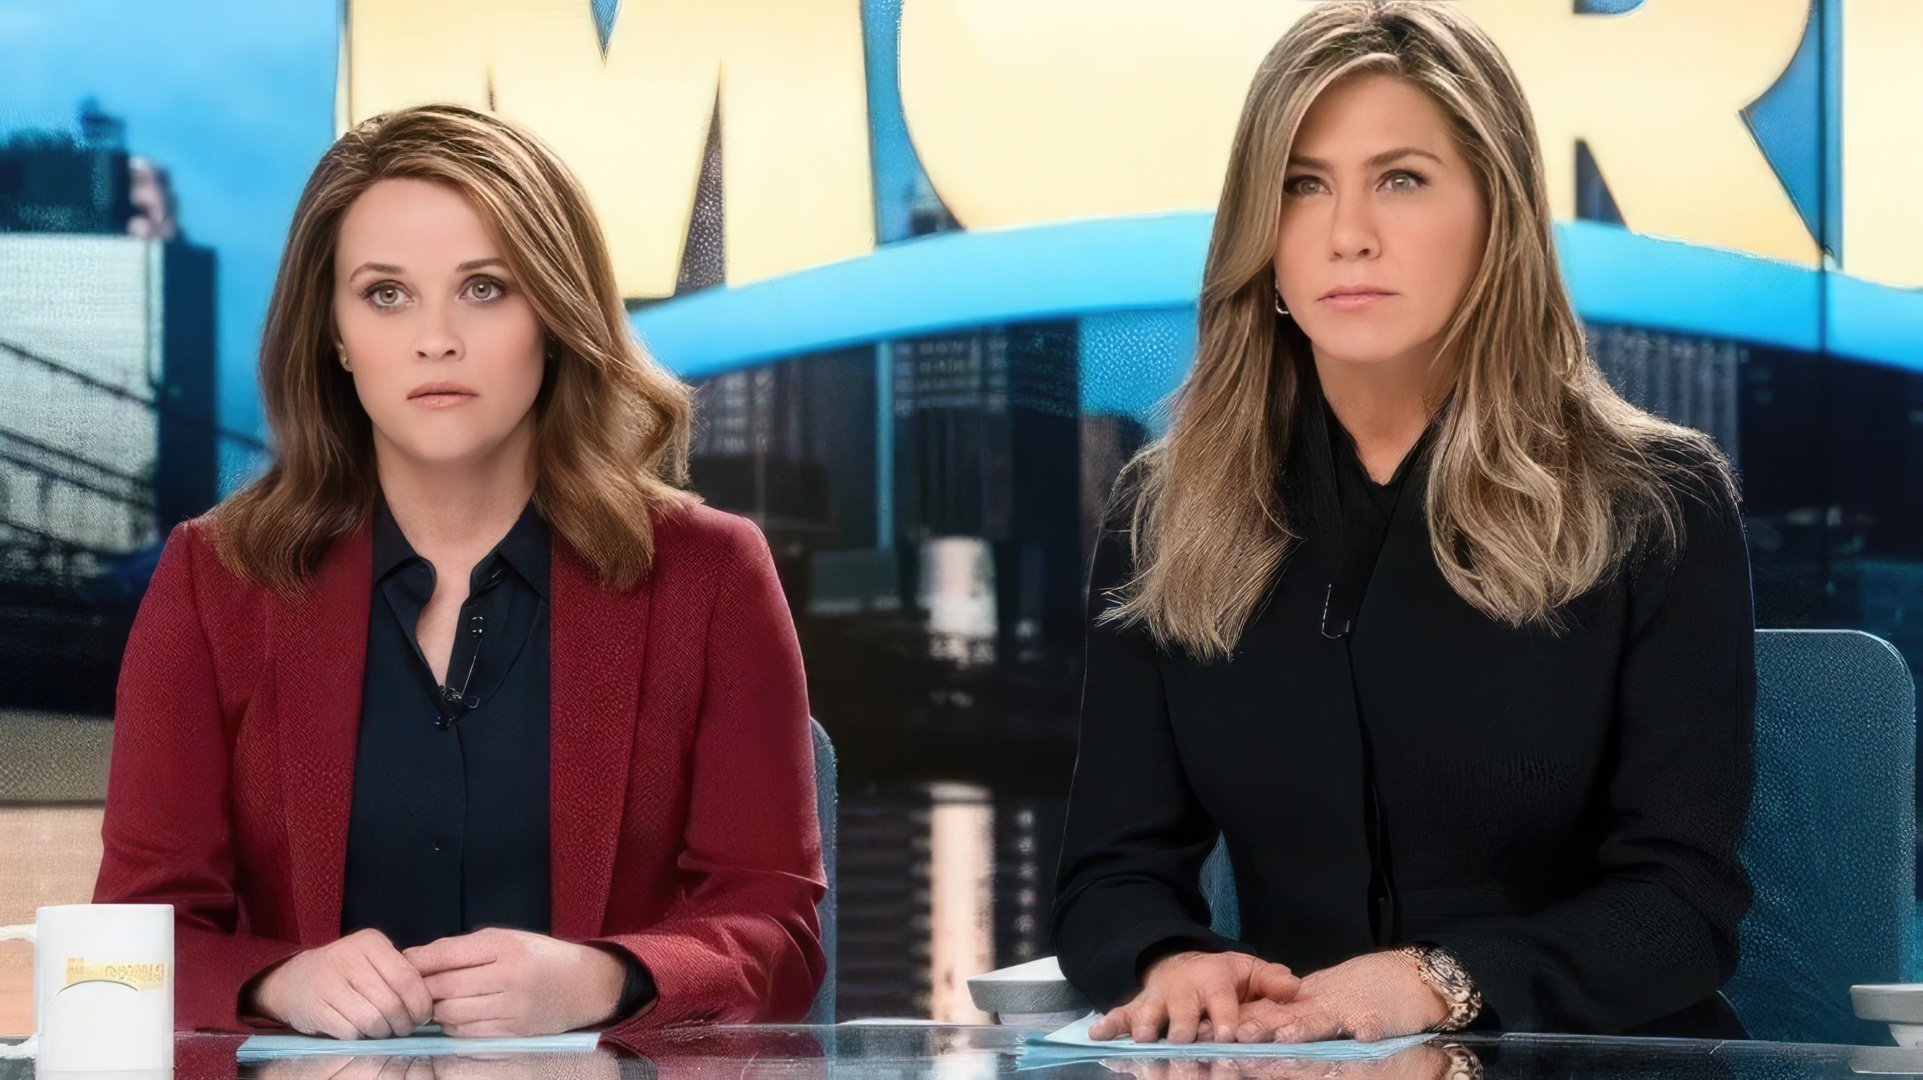 Jennifer Aniston and Reese Witherspoon in 'The Morning Show'